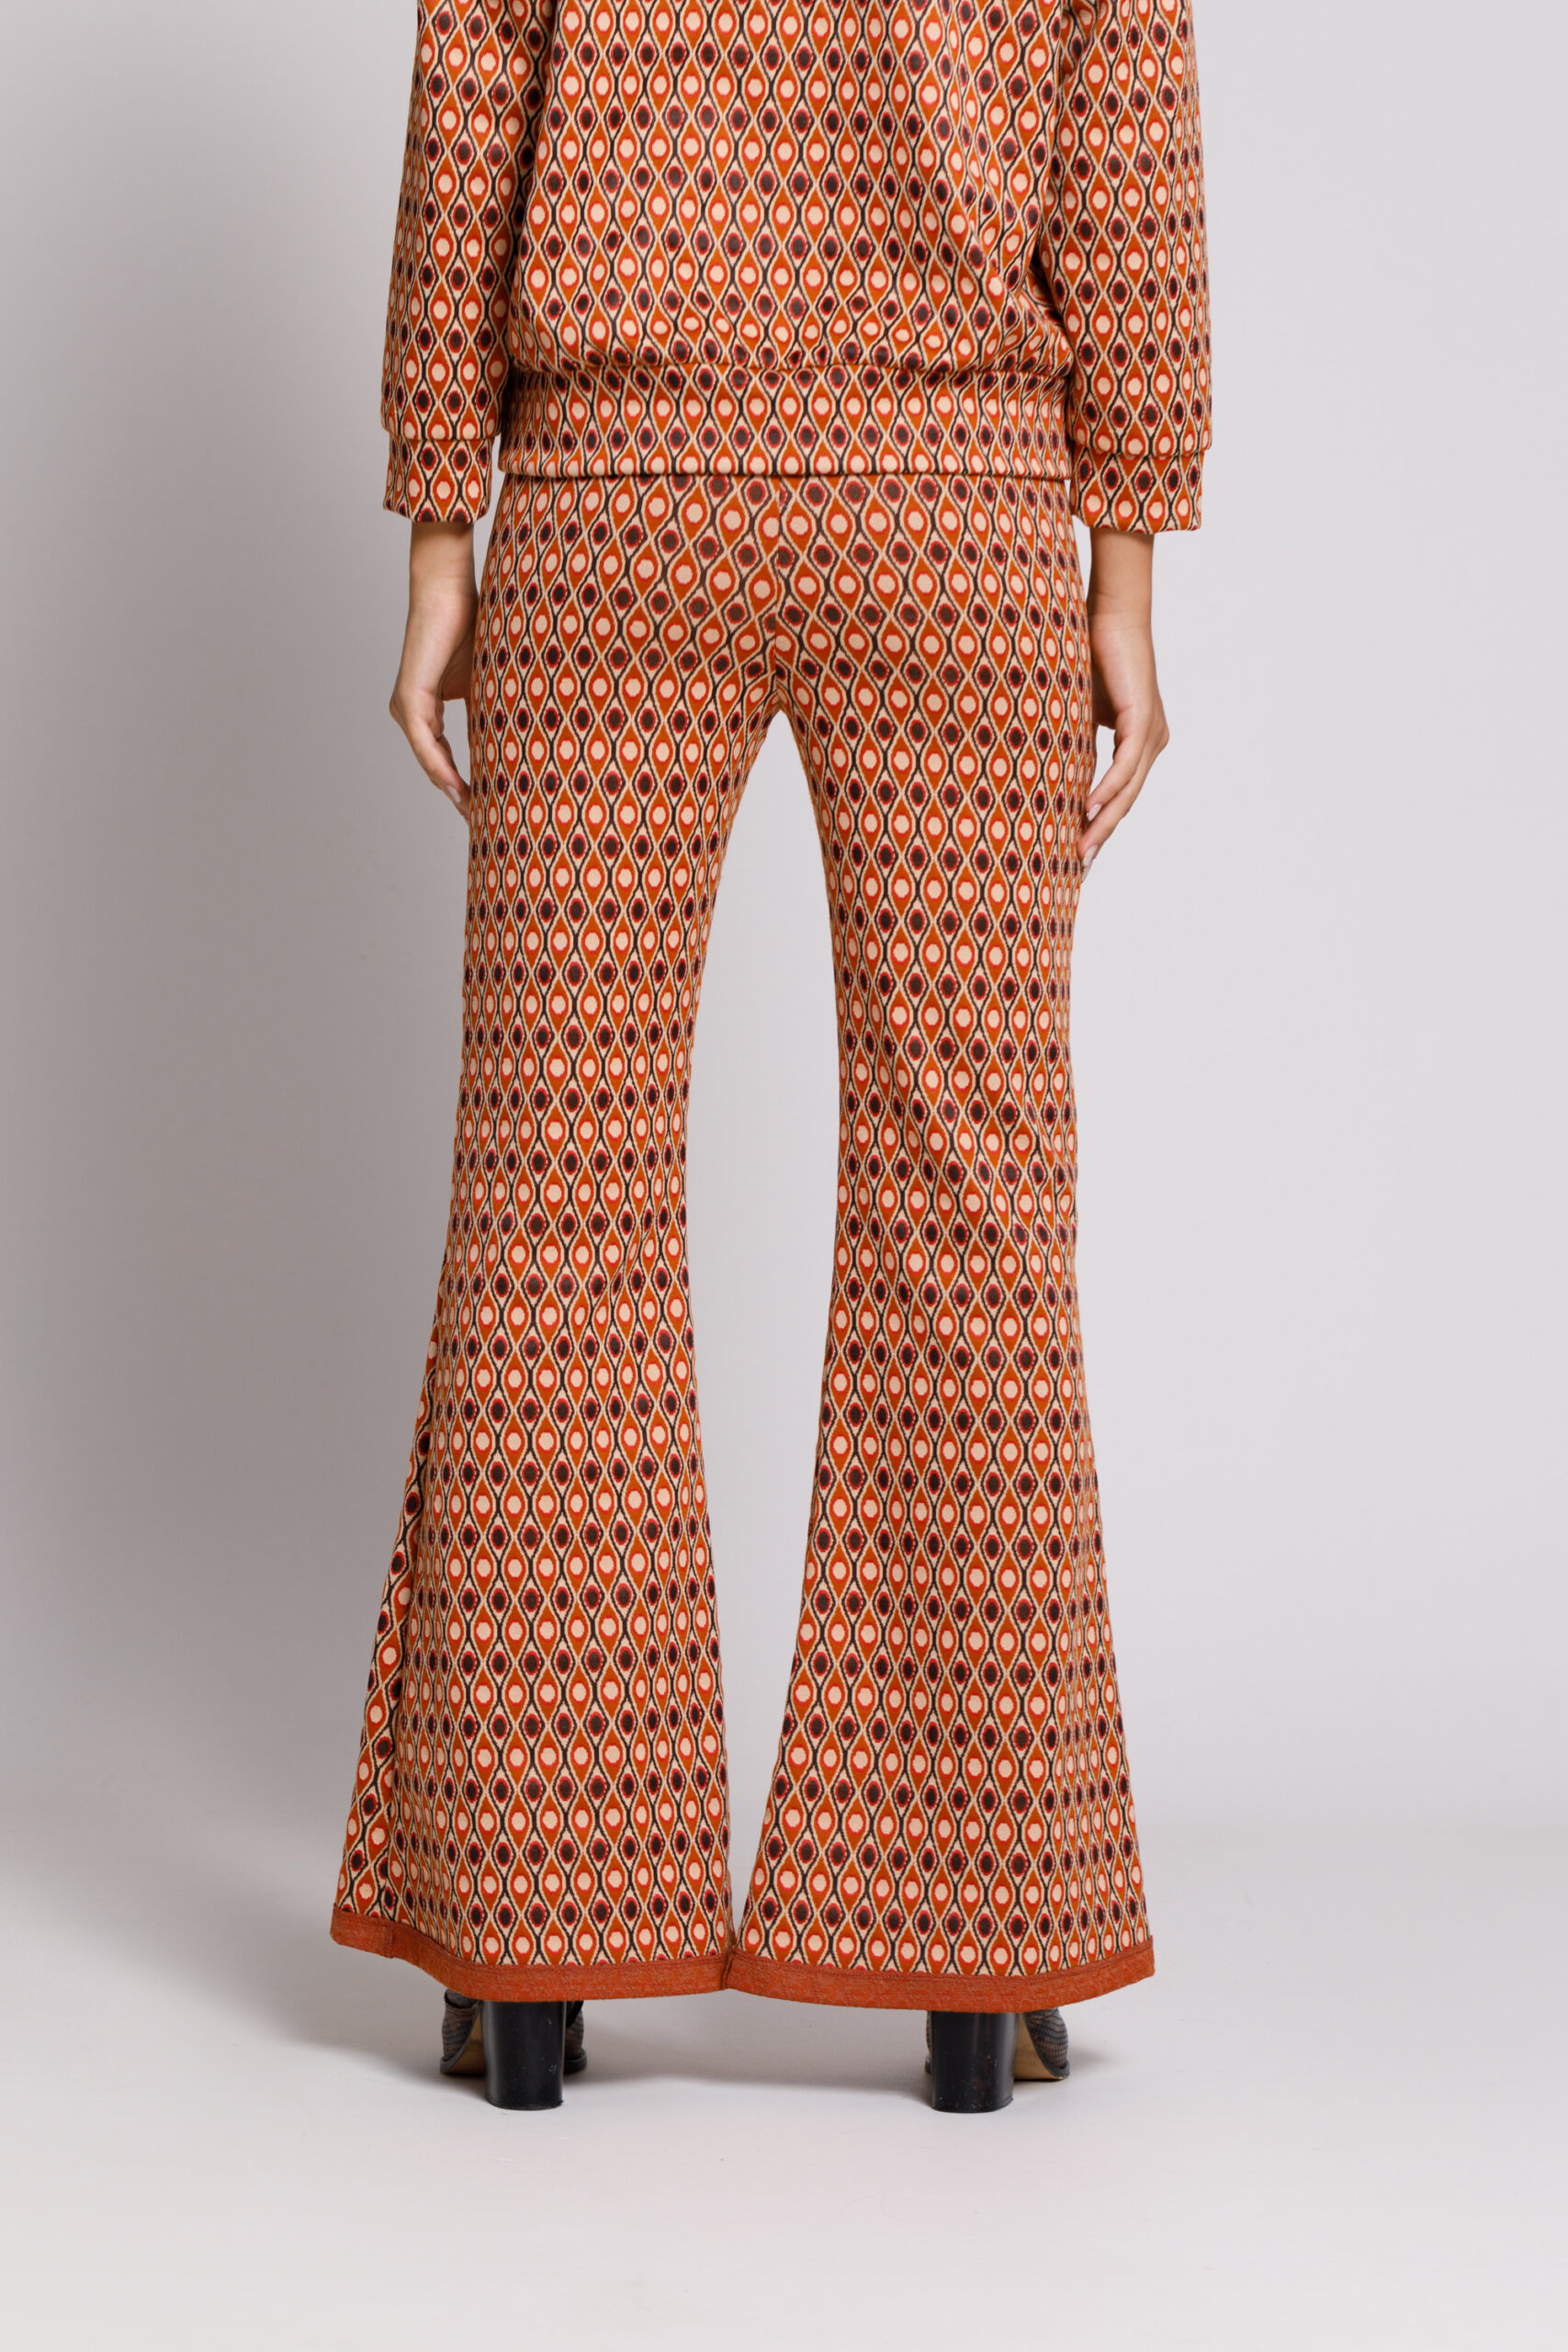 ARLO 23 flared trousers with print. Natural fabrics, original design, handmade embroidery